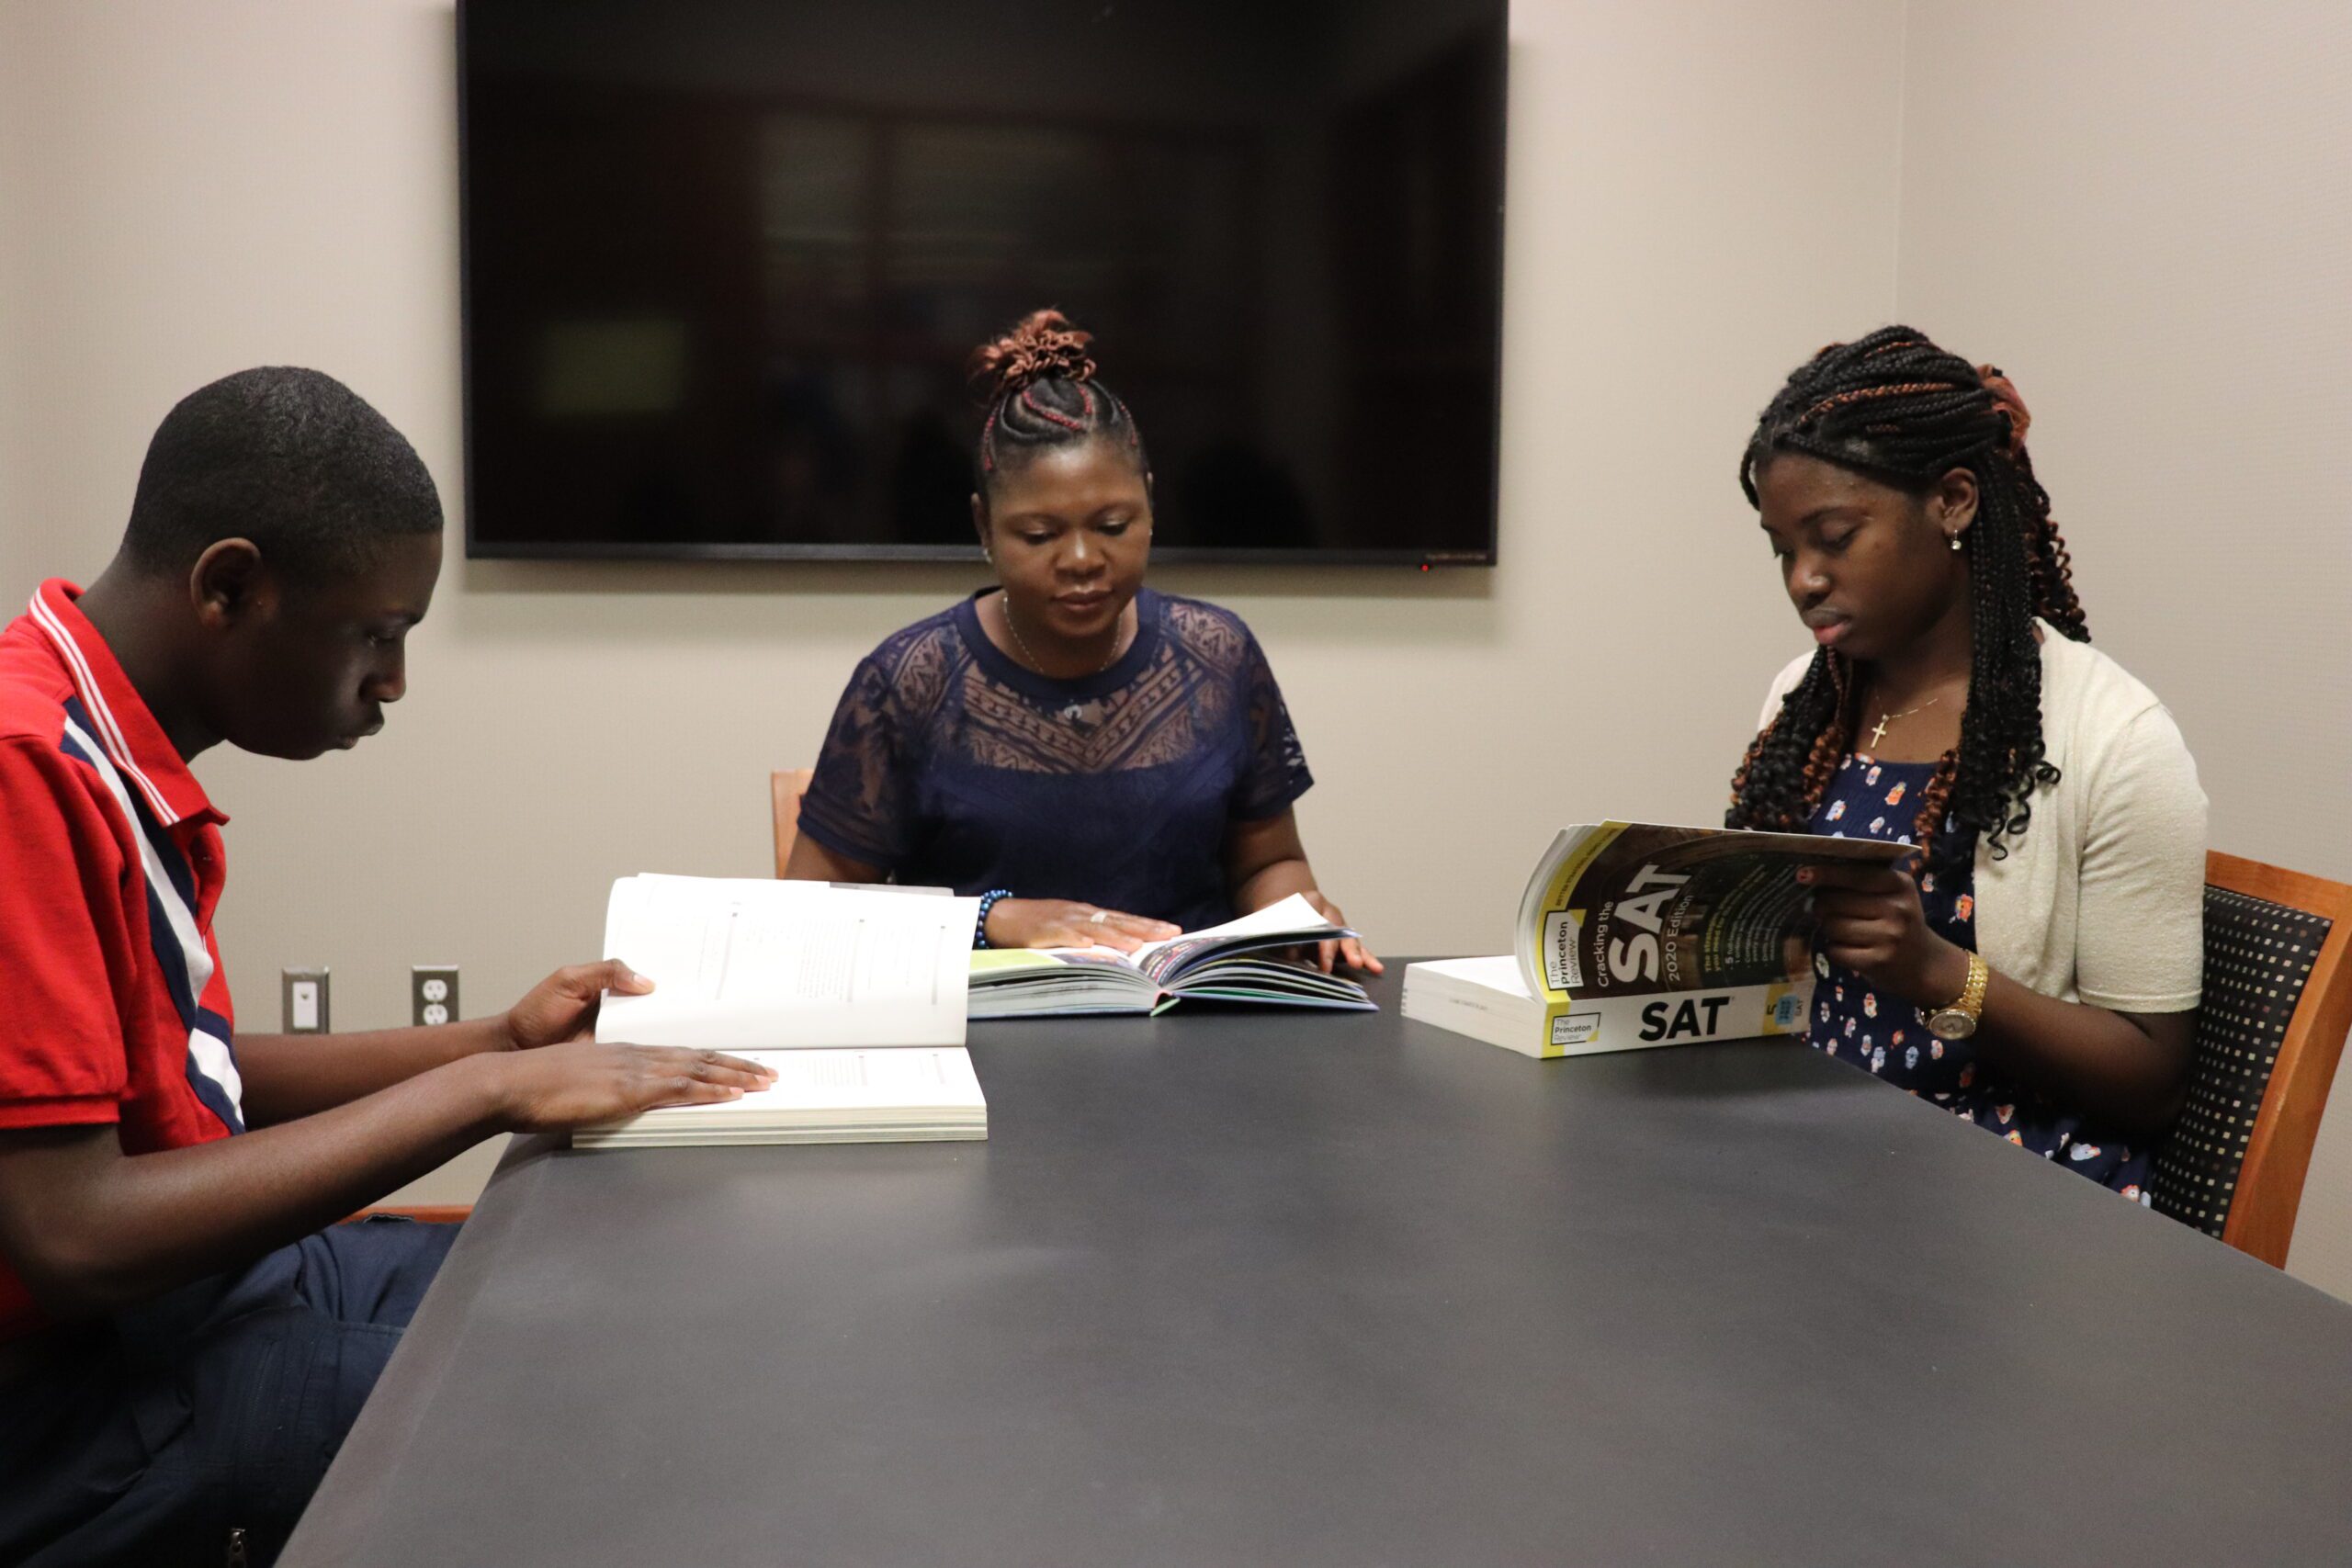 Mom and two teens reading in a study room